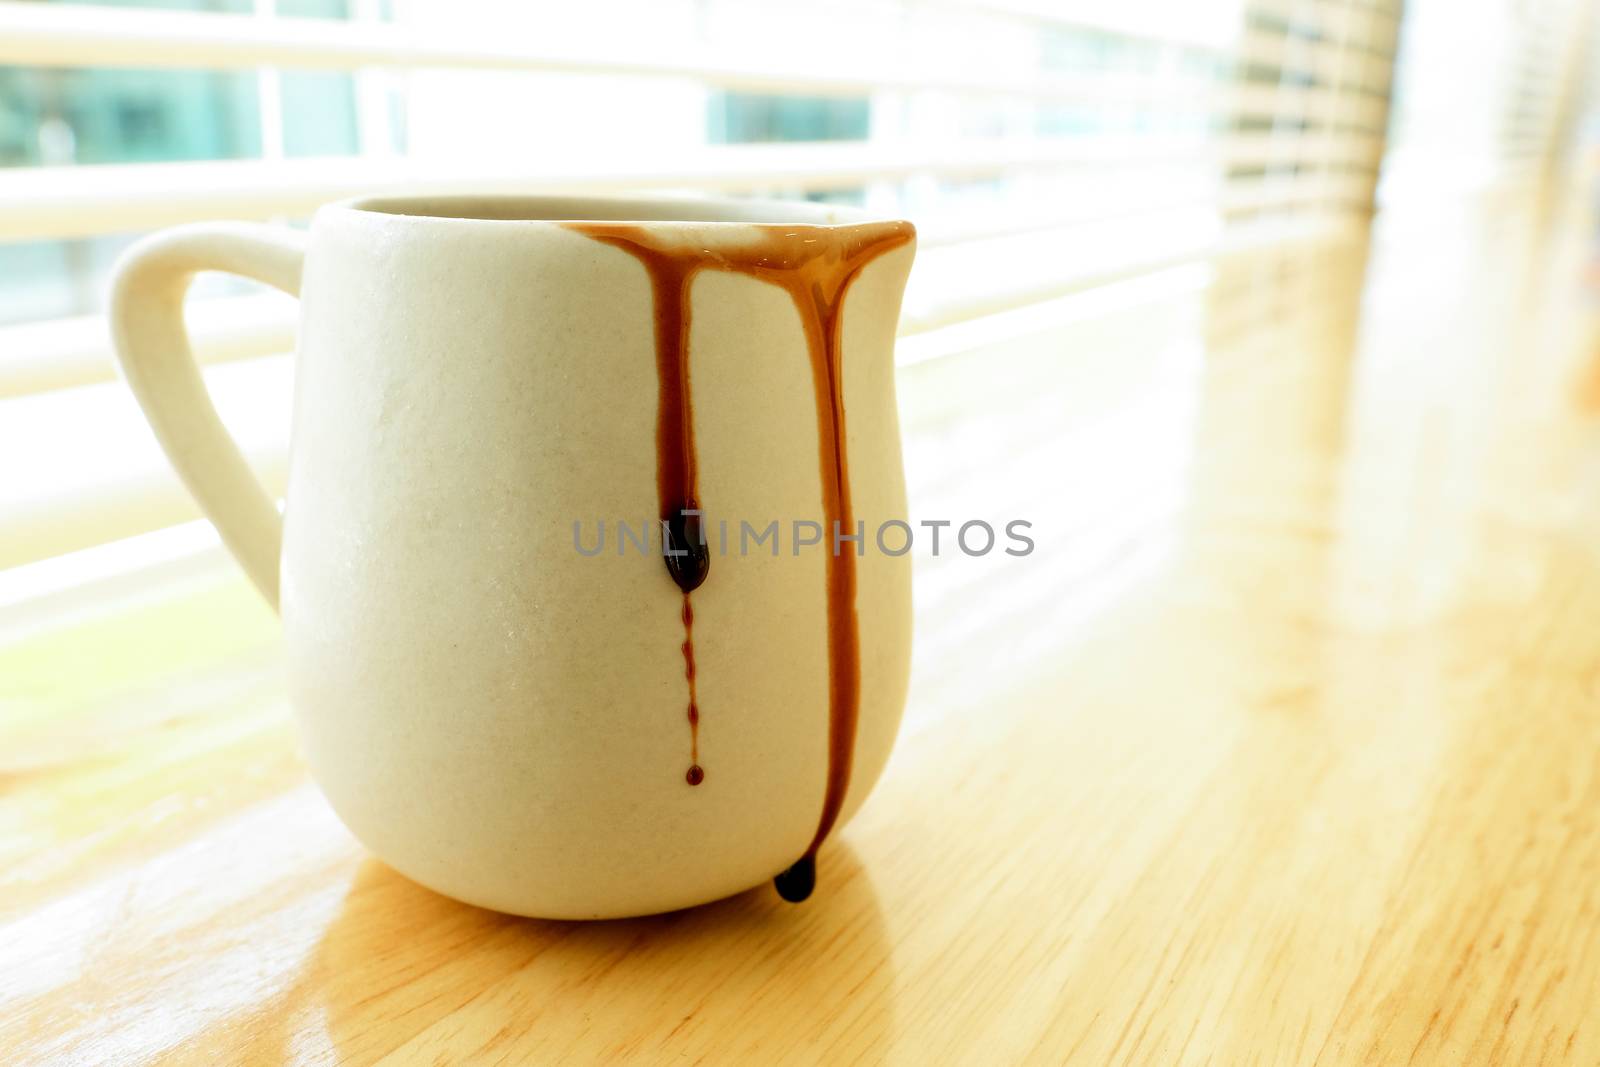 few drops of chocolate syrup on the side of a ceramic mug on top of a wooden counter by a glass window